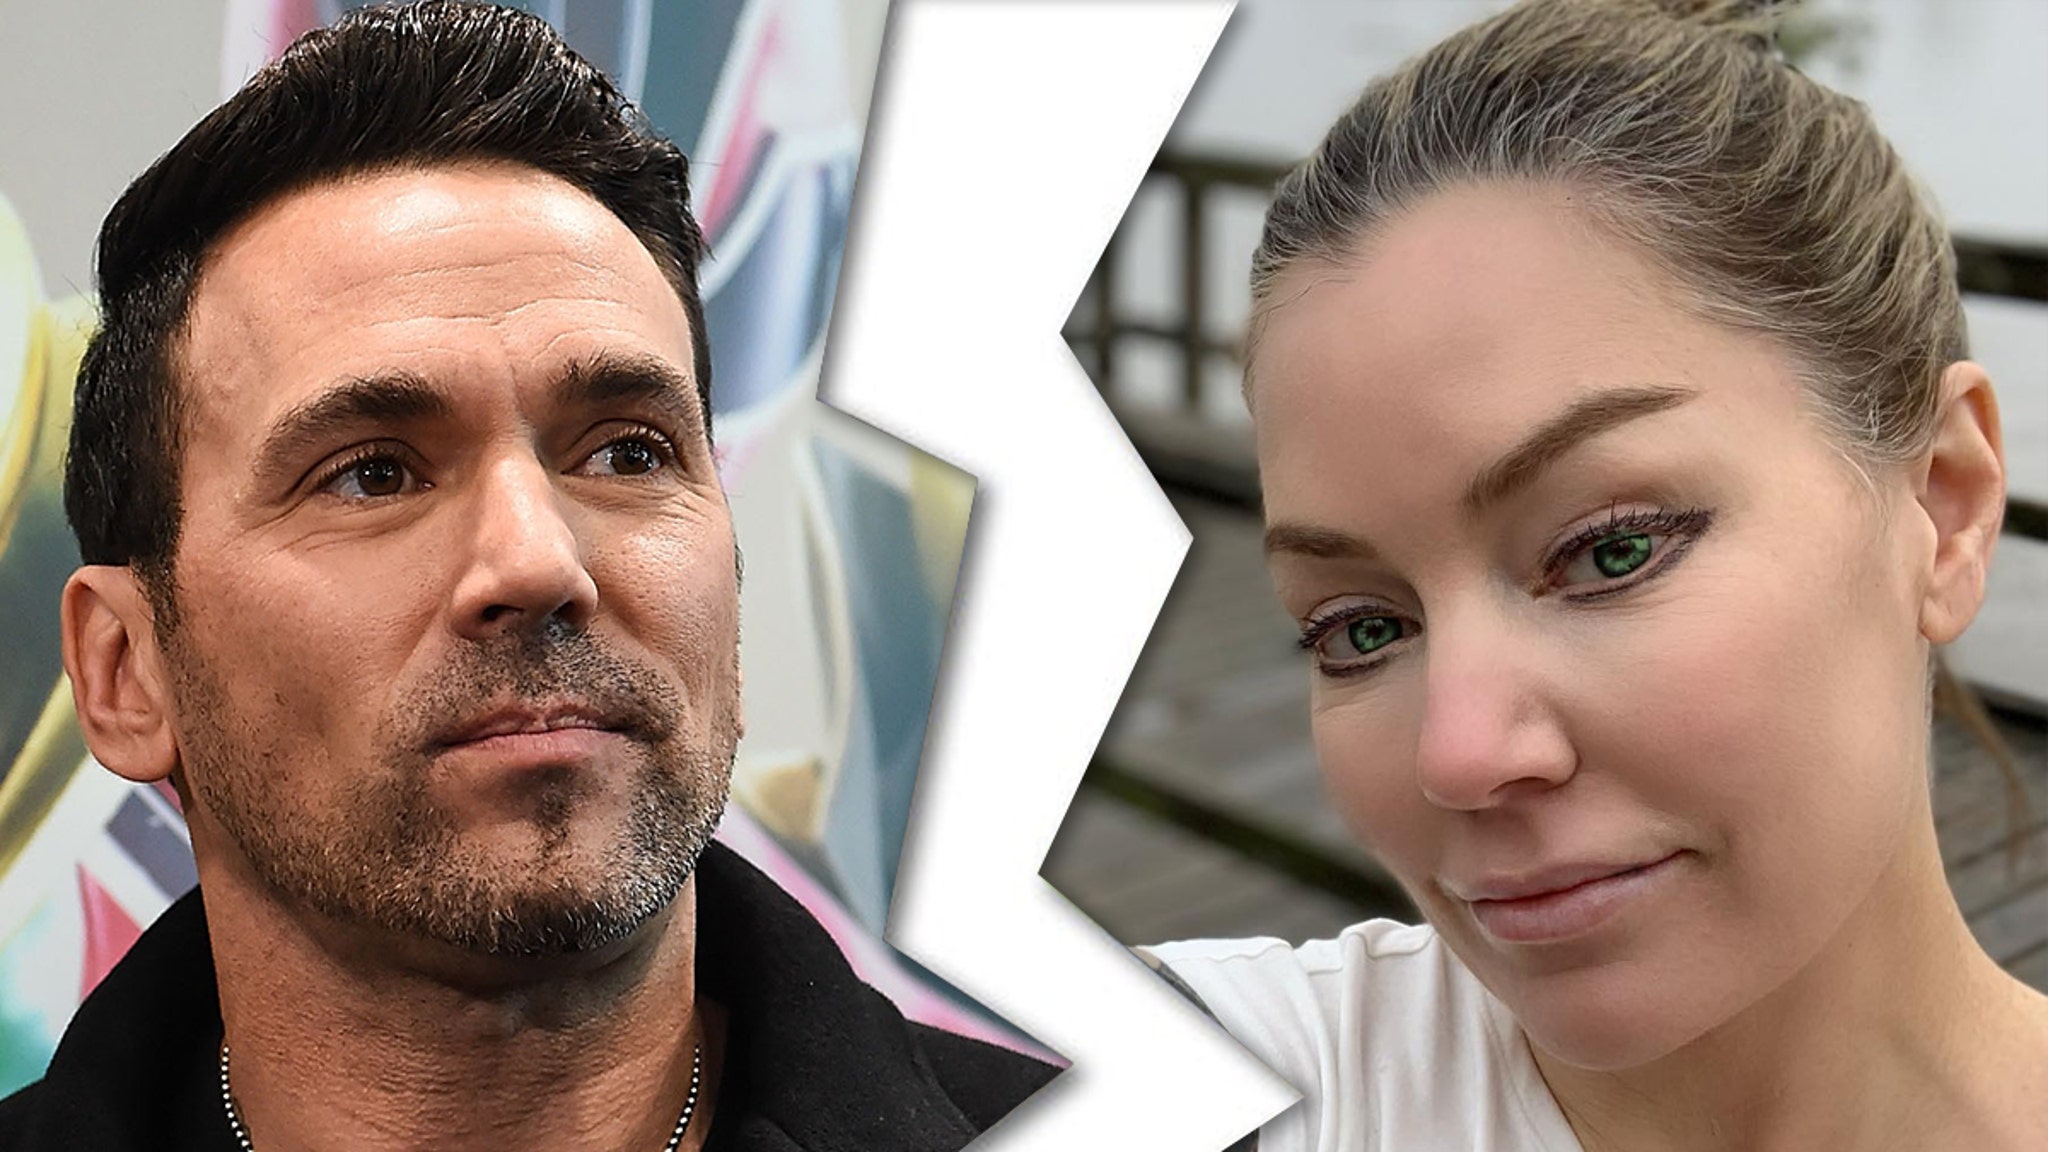 Wife of Power Rangers actor Jason David Frank is quitting her marriage